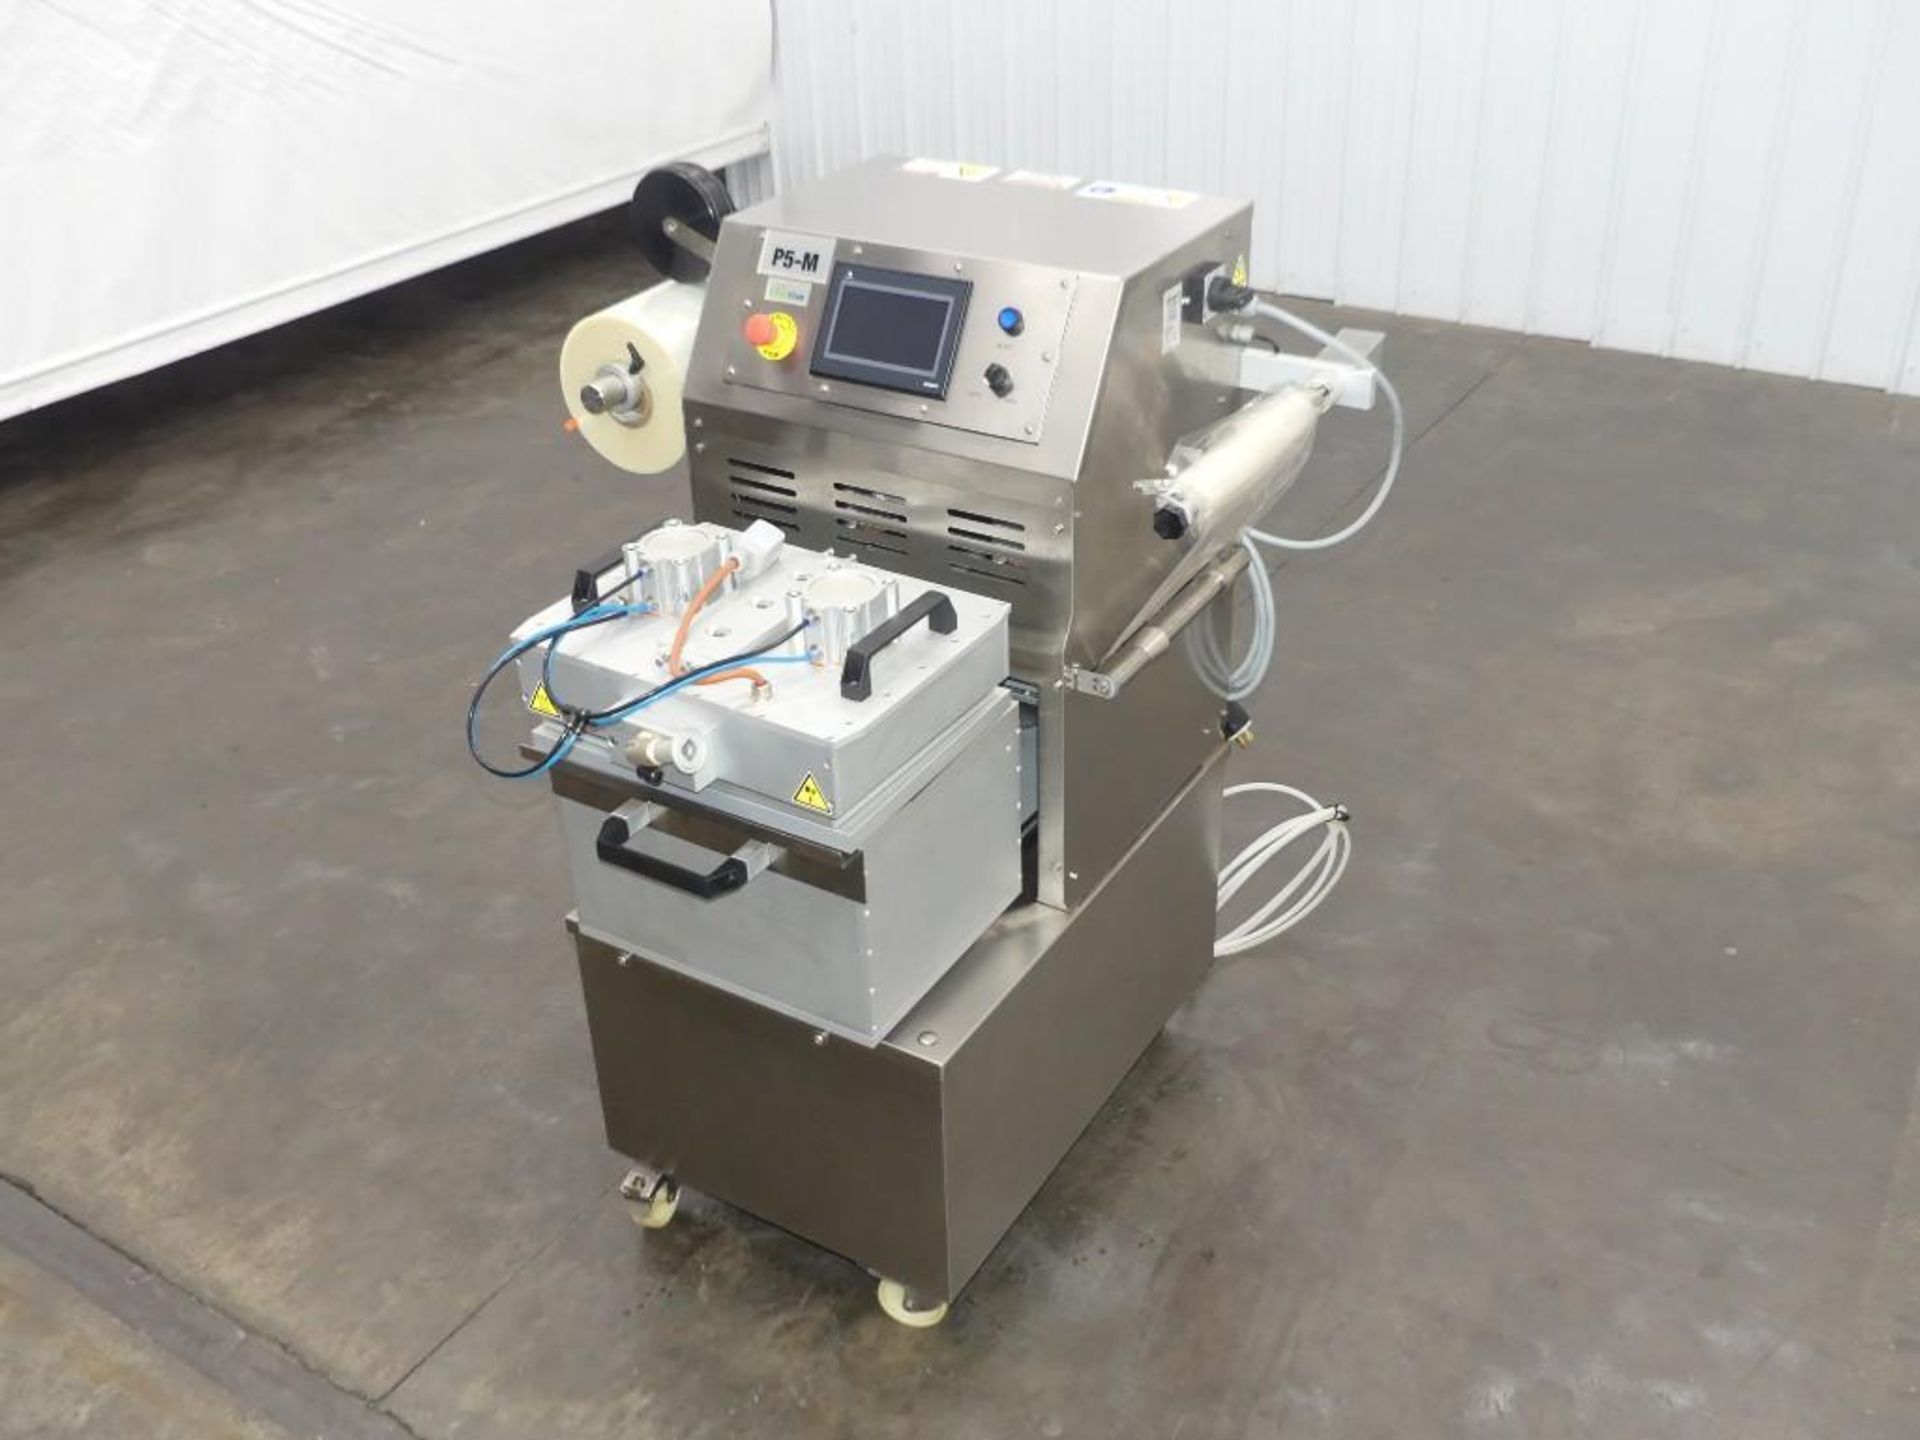 Point Five P5-M-B Semi-Automatic Stainless Steel Tray Sealer - Image 3 of 24